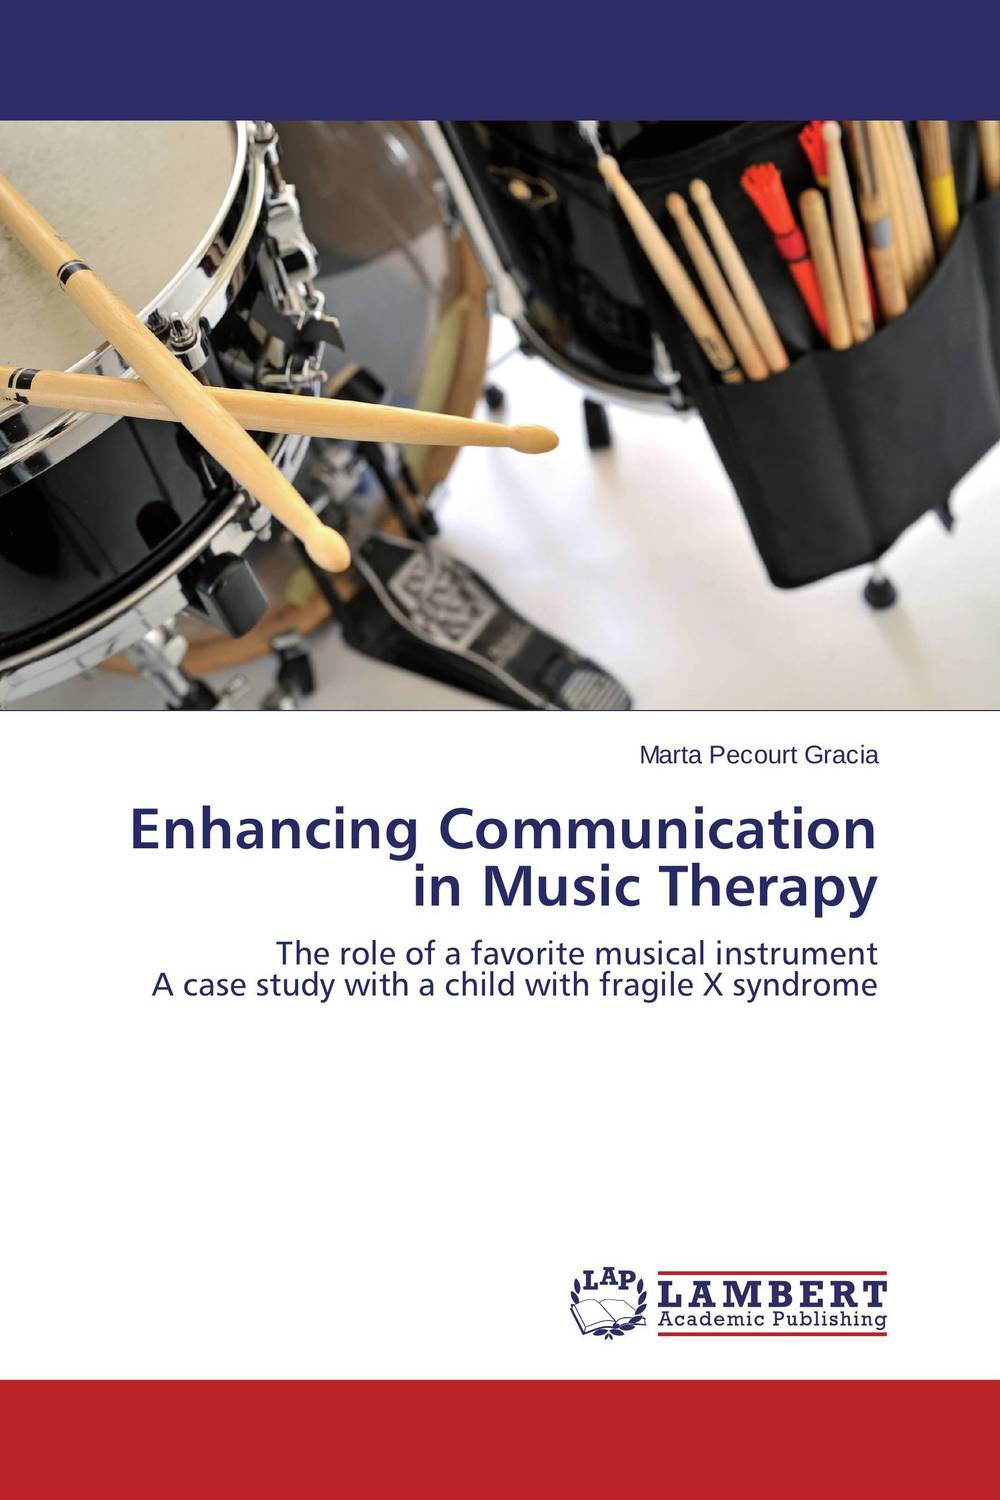 Enhancing Communication in Music Therapy